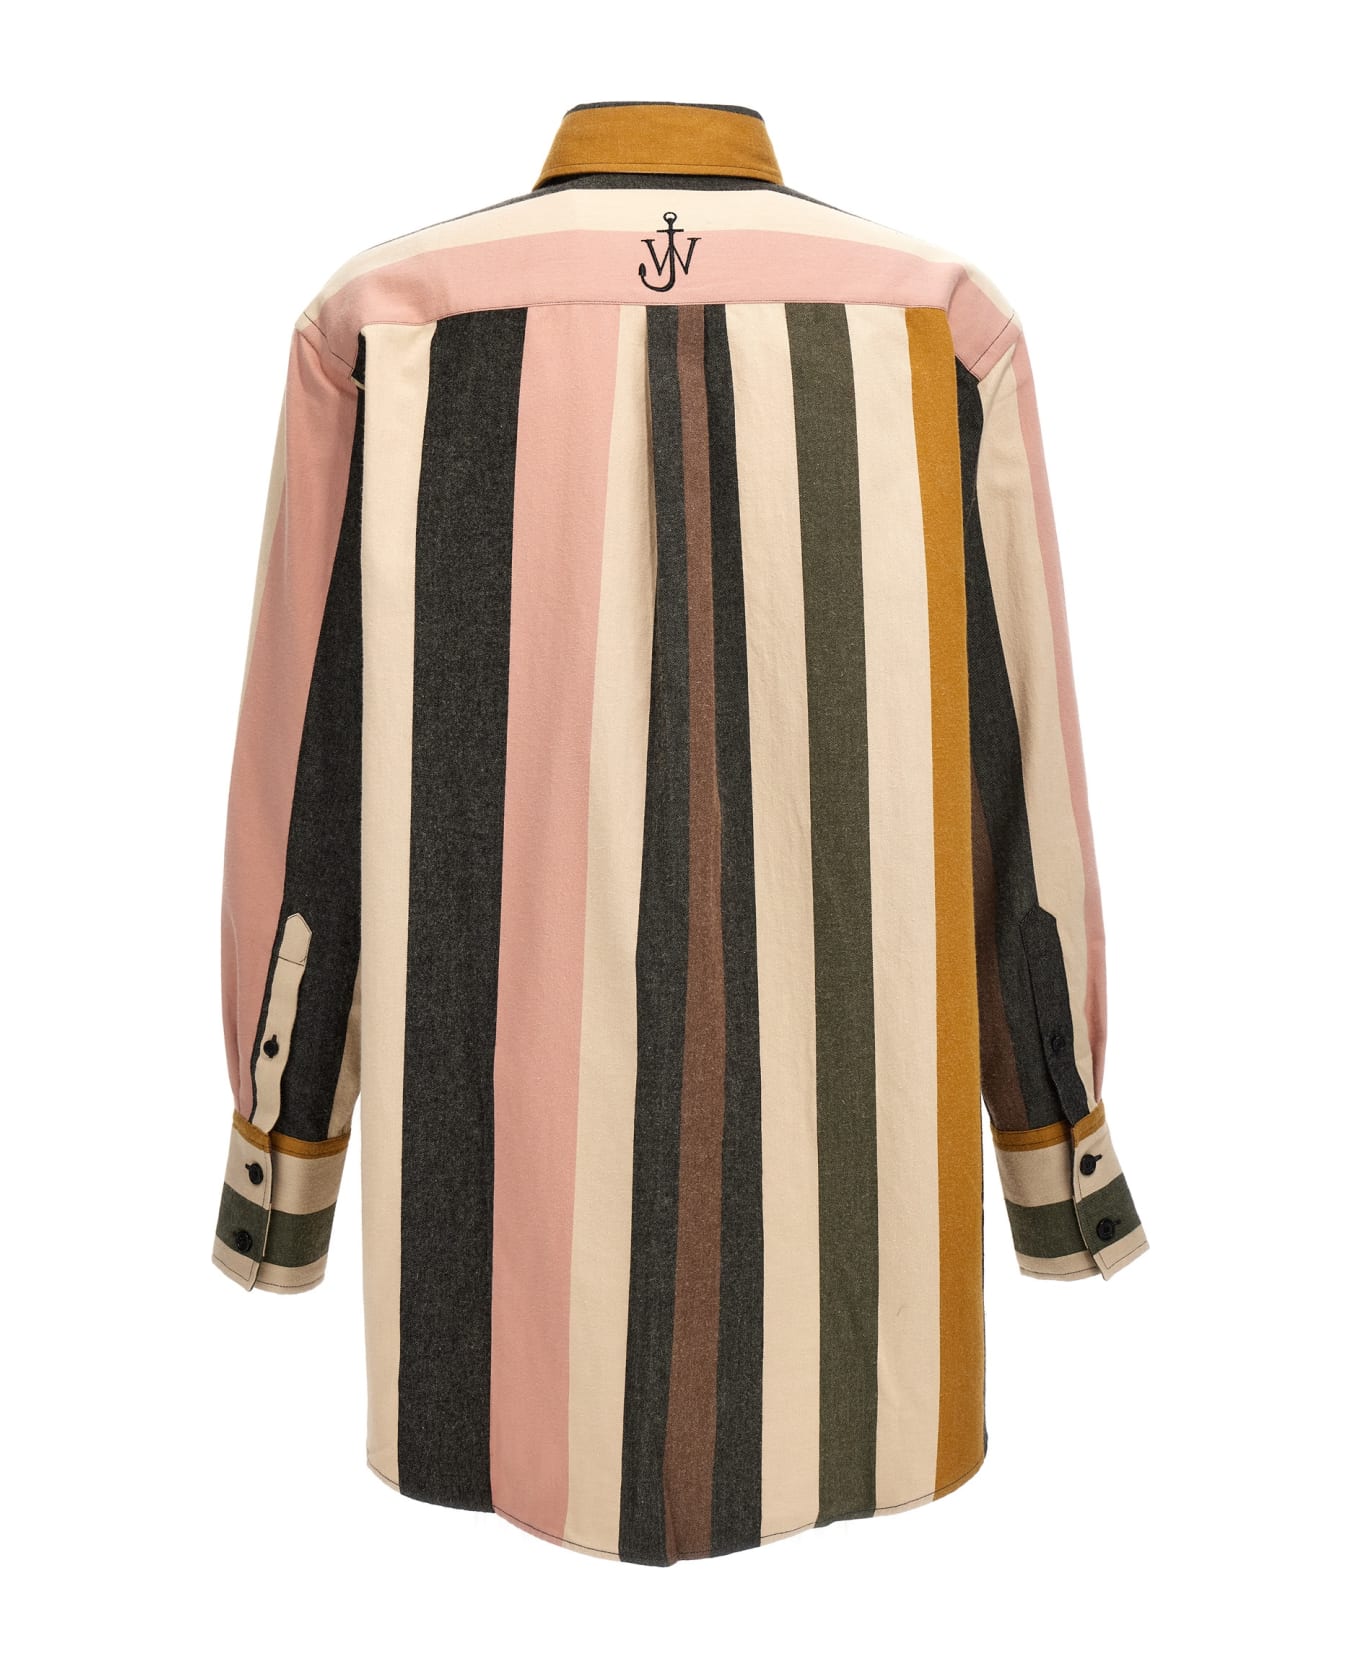 J.W. Anderson Logo Embroidered Striped Shirt - Multicolor